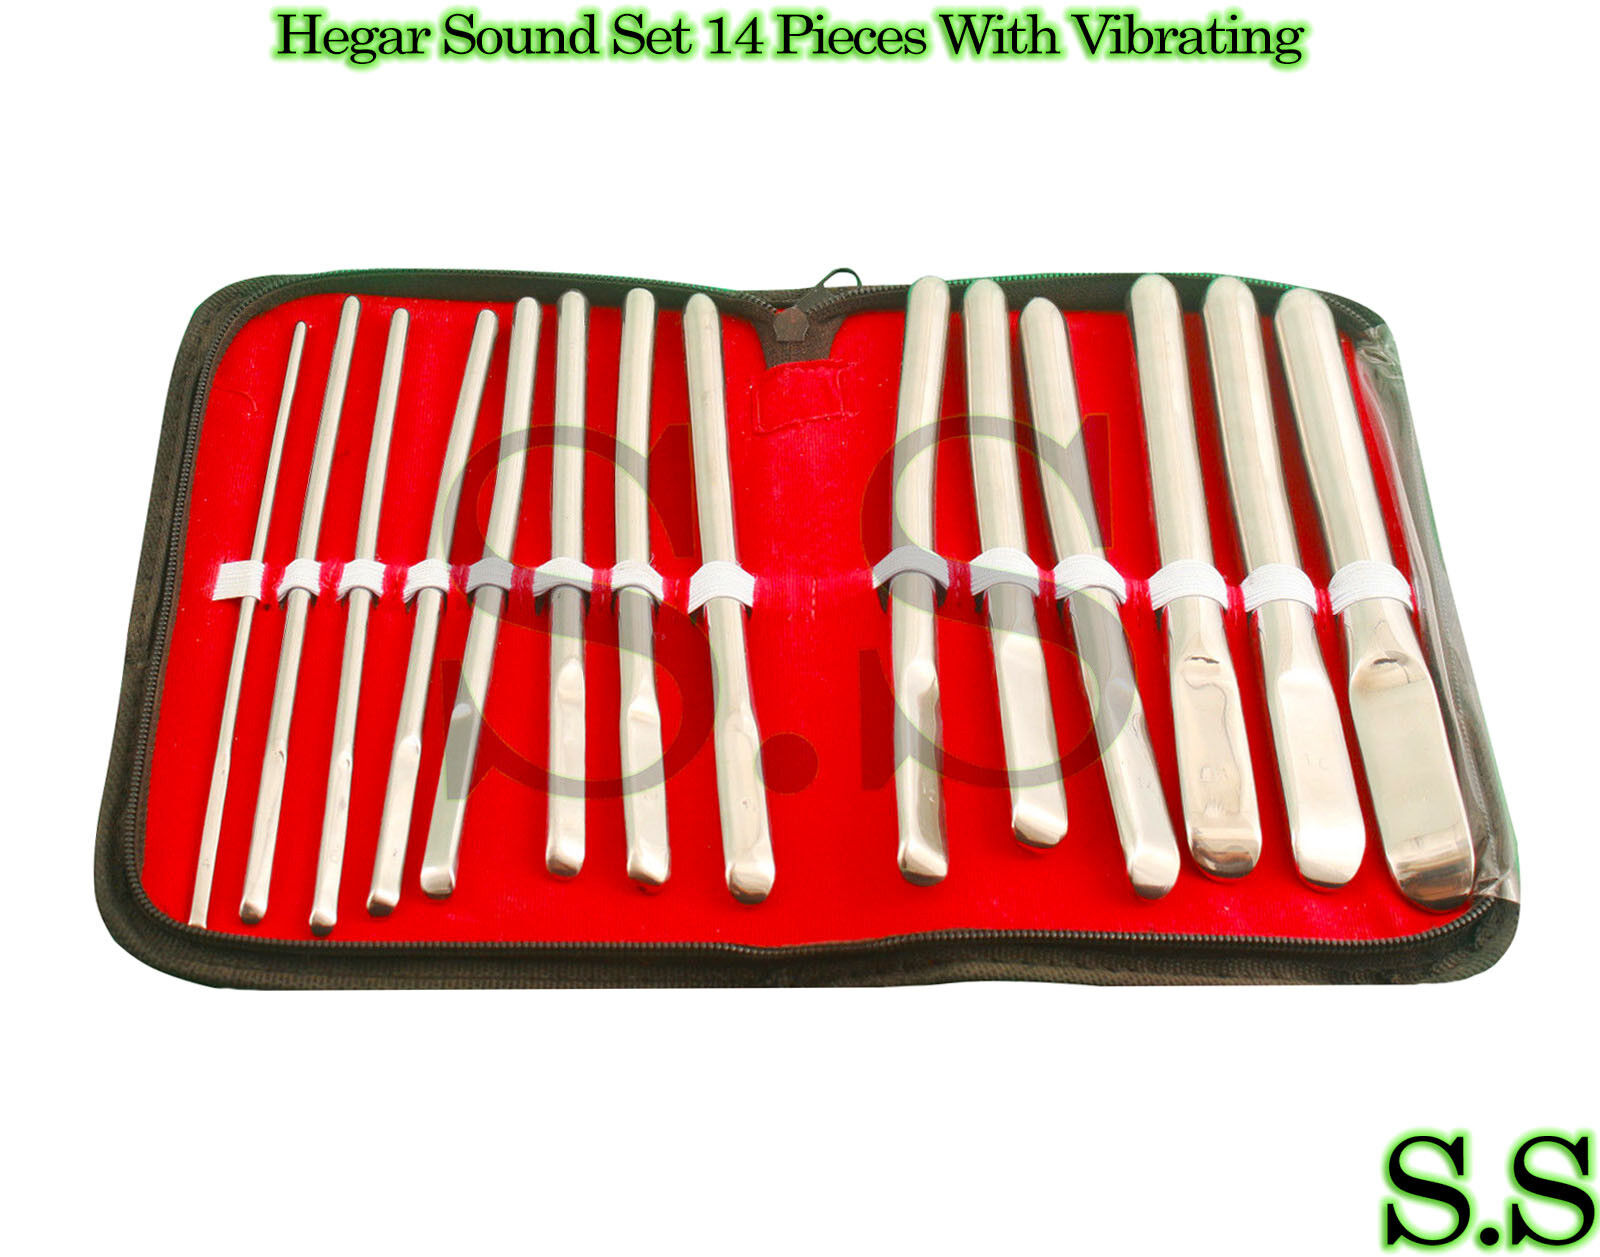 FLAT ENDED URETHRAL SOUNDS 14 PIECE KIT / ROD DILATOR S.S Does Not Apply - фотография #2